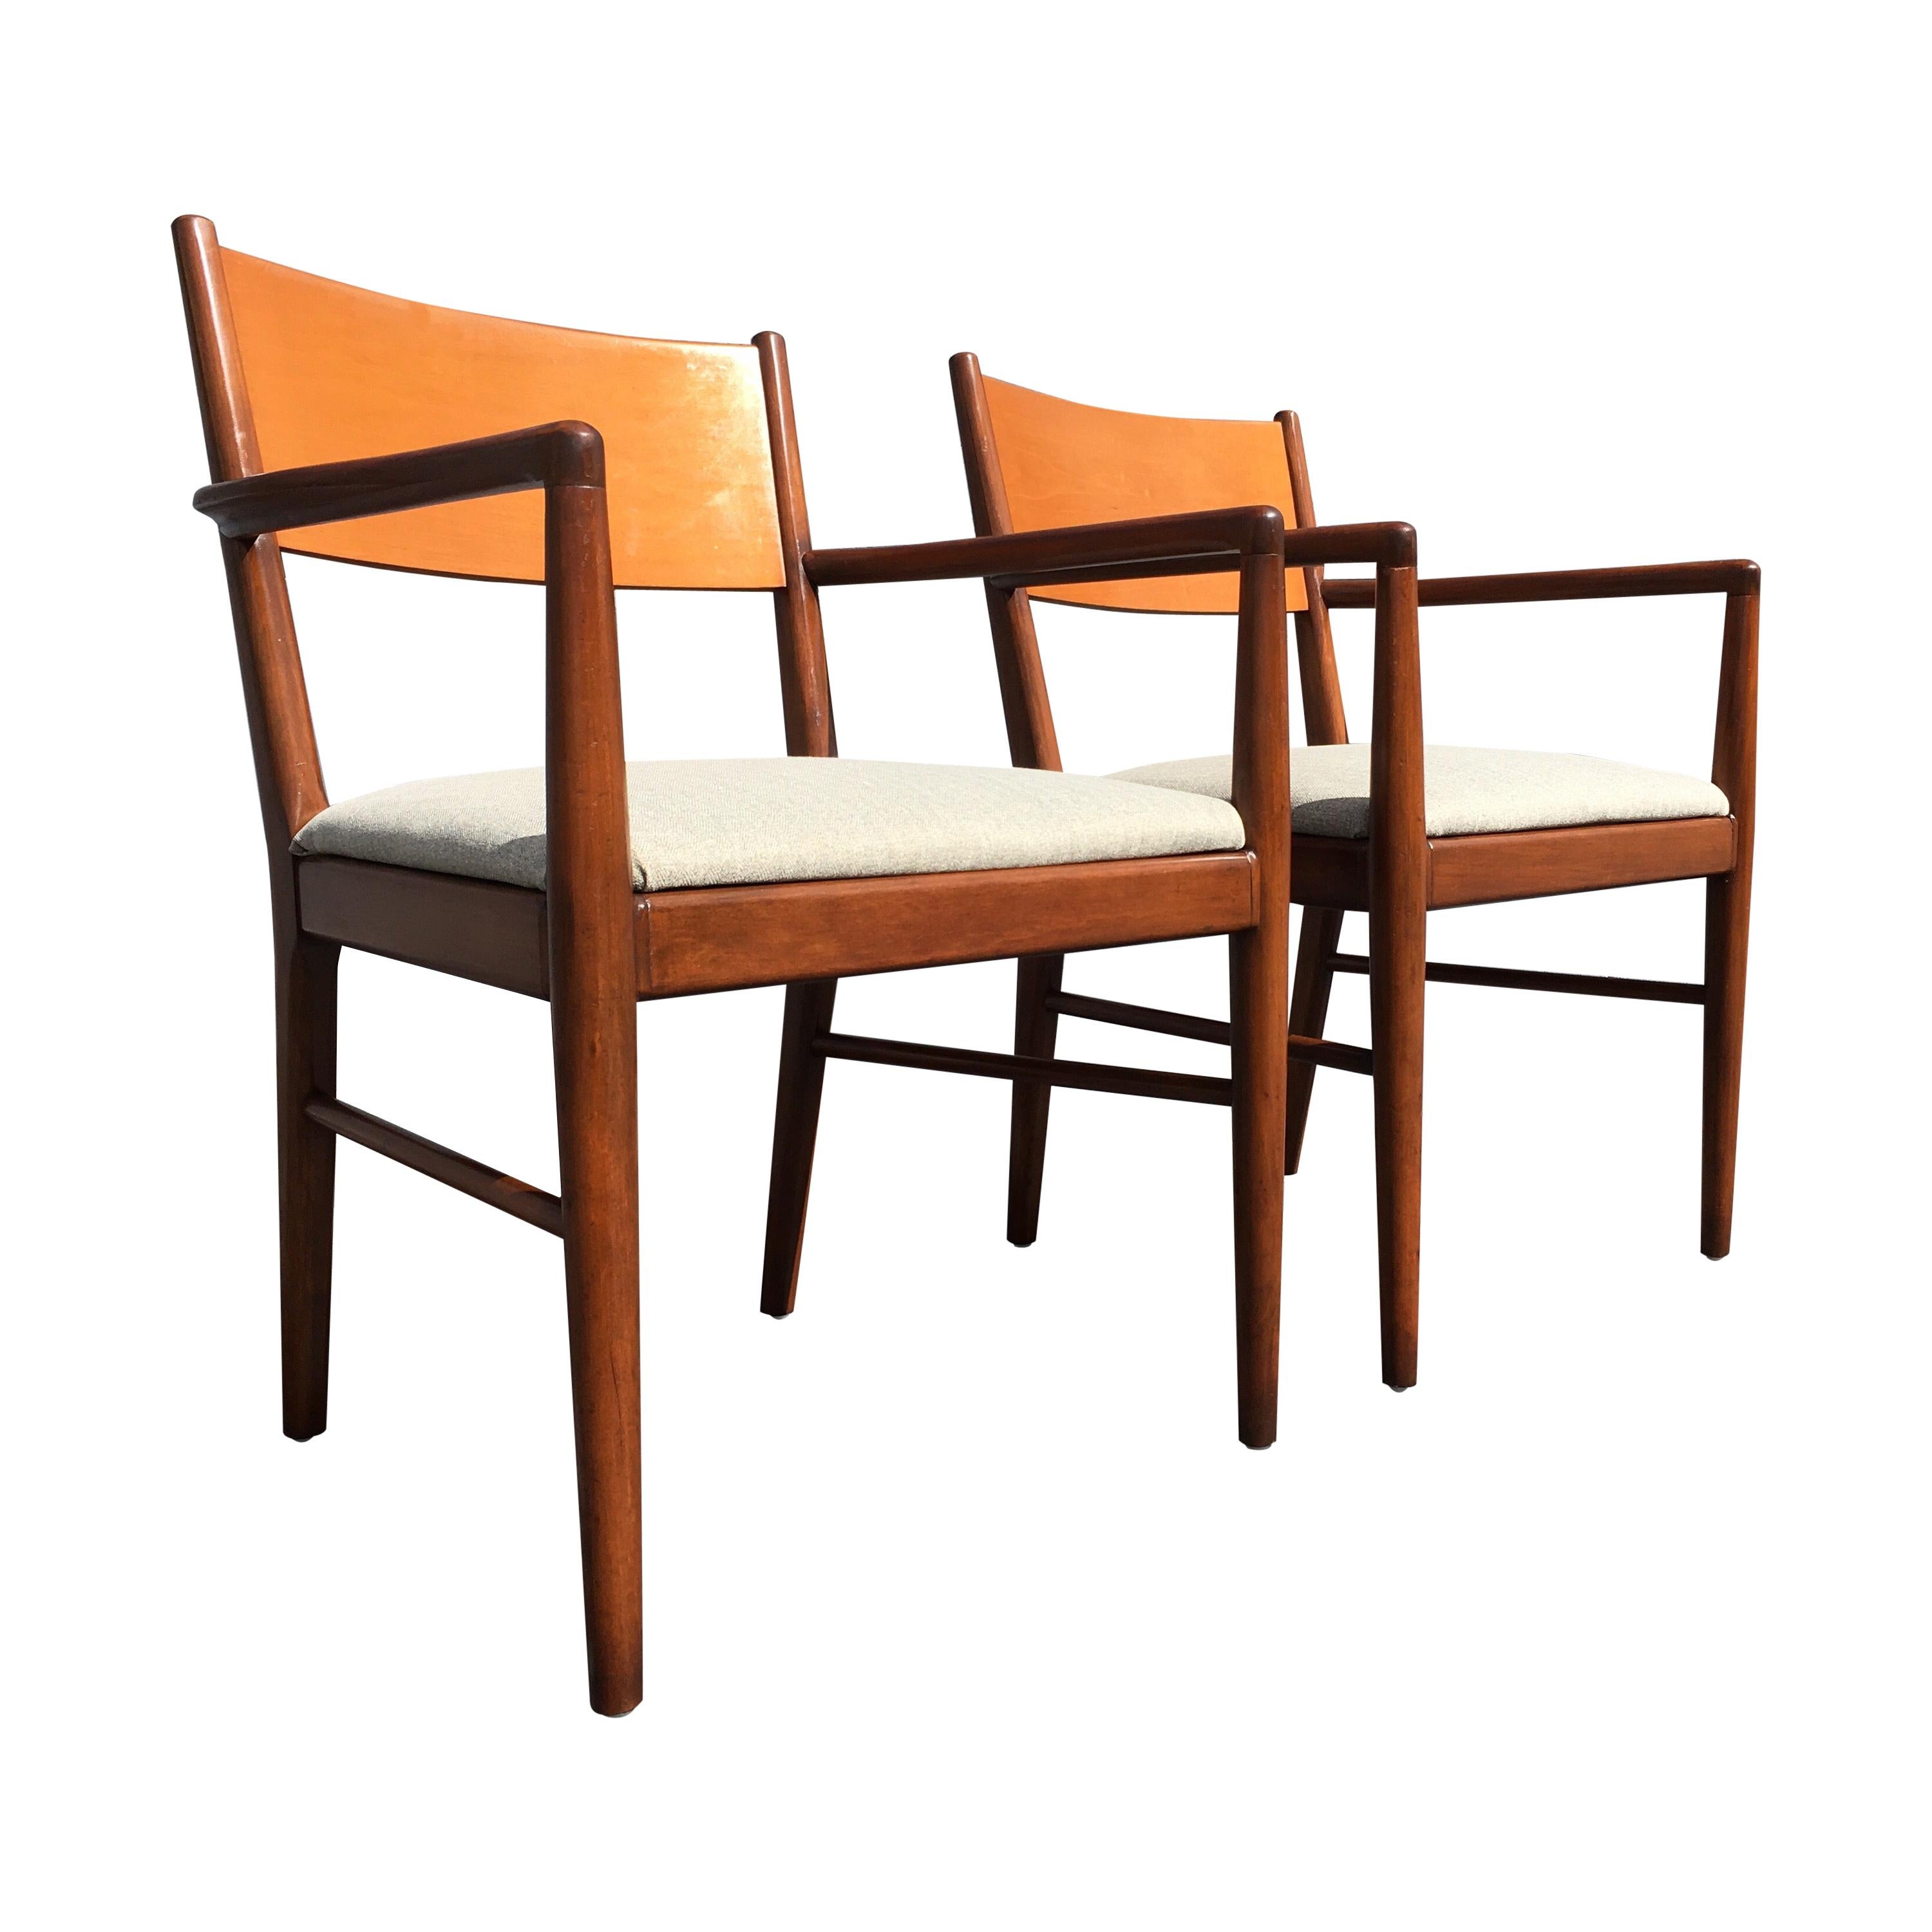 Pair of Mid-Century Modern Armchairs in the Style of Finn Juhl For Sale